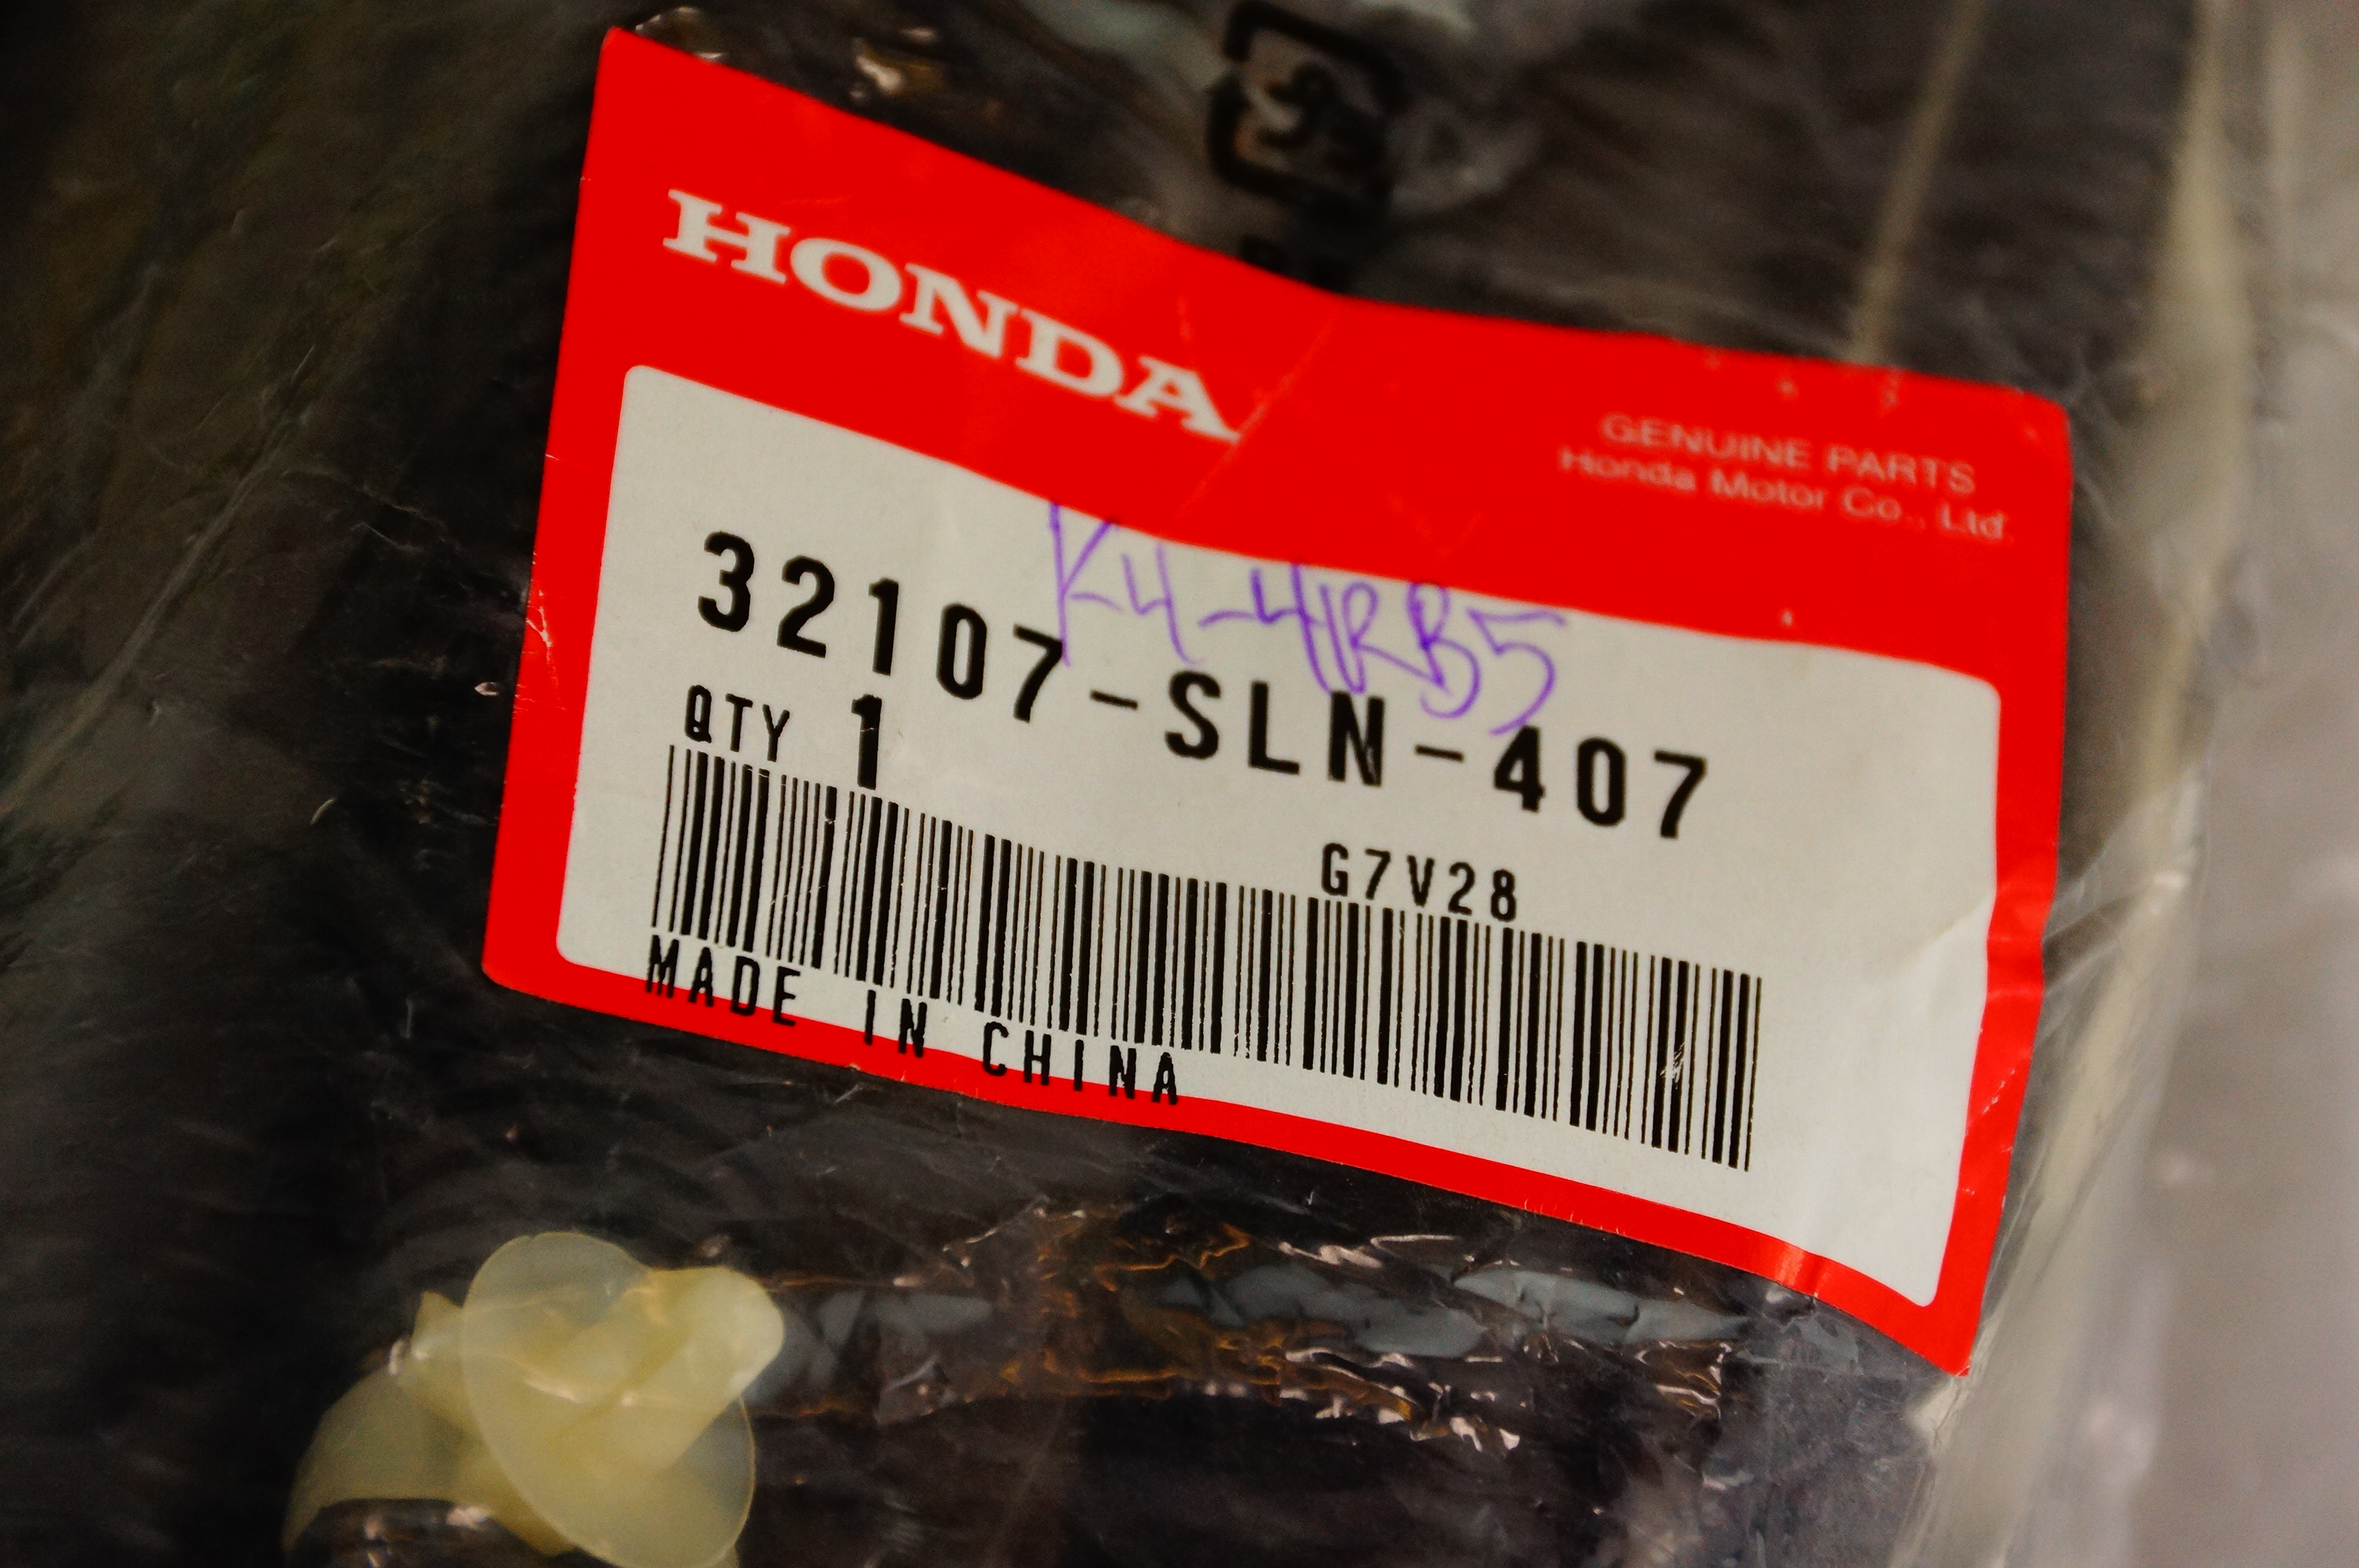 Genuine OEM 32107-SLN-407 Honda Floor Wire Harness for 2007-08 Fit Free Shipping - image 6